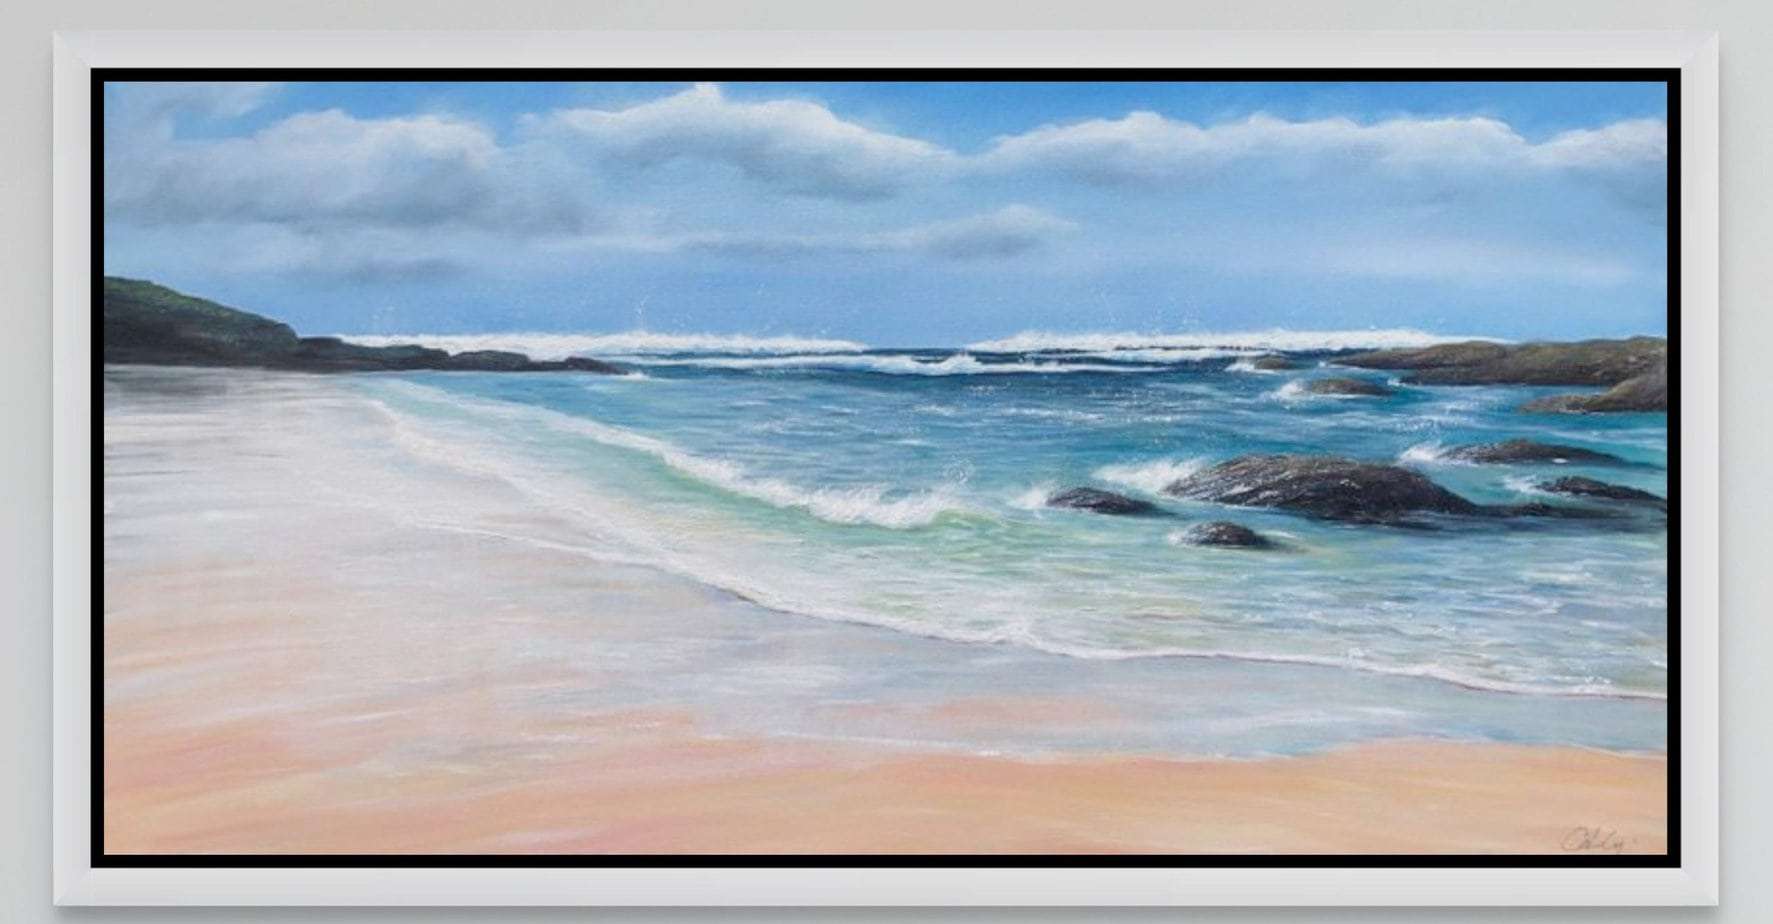 Treyarnon Bay Beach painting framed in a white wooden floating frame